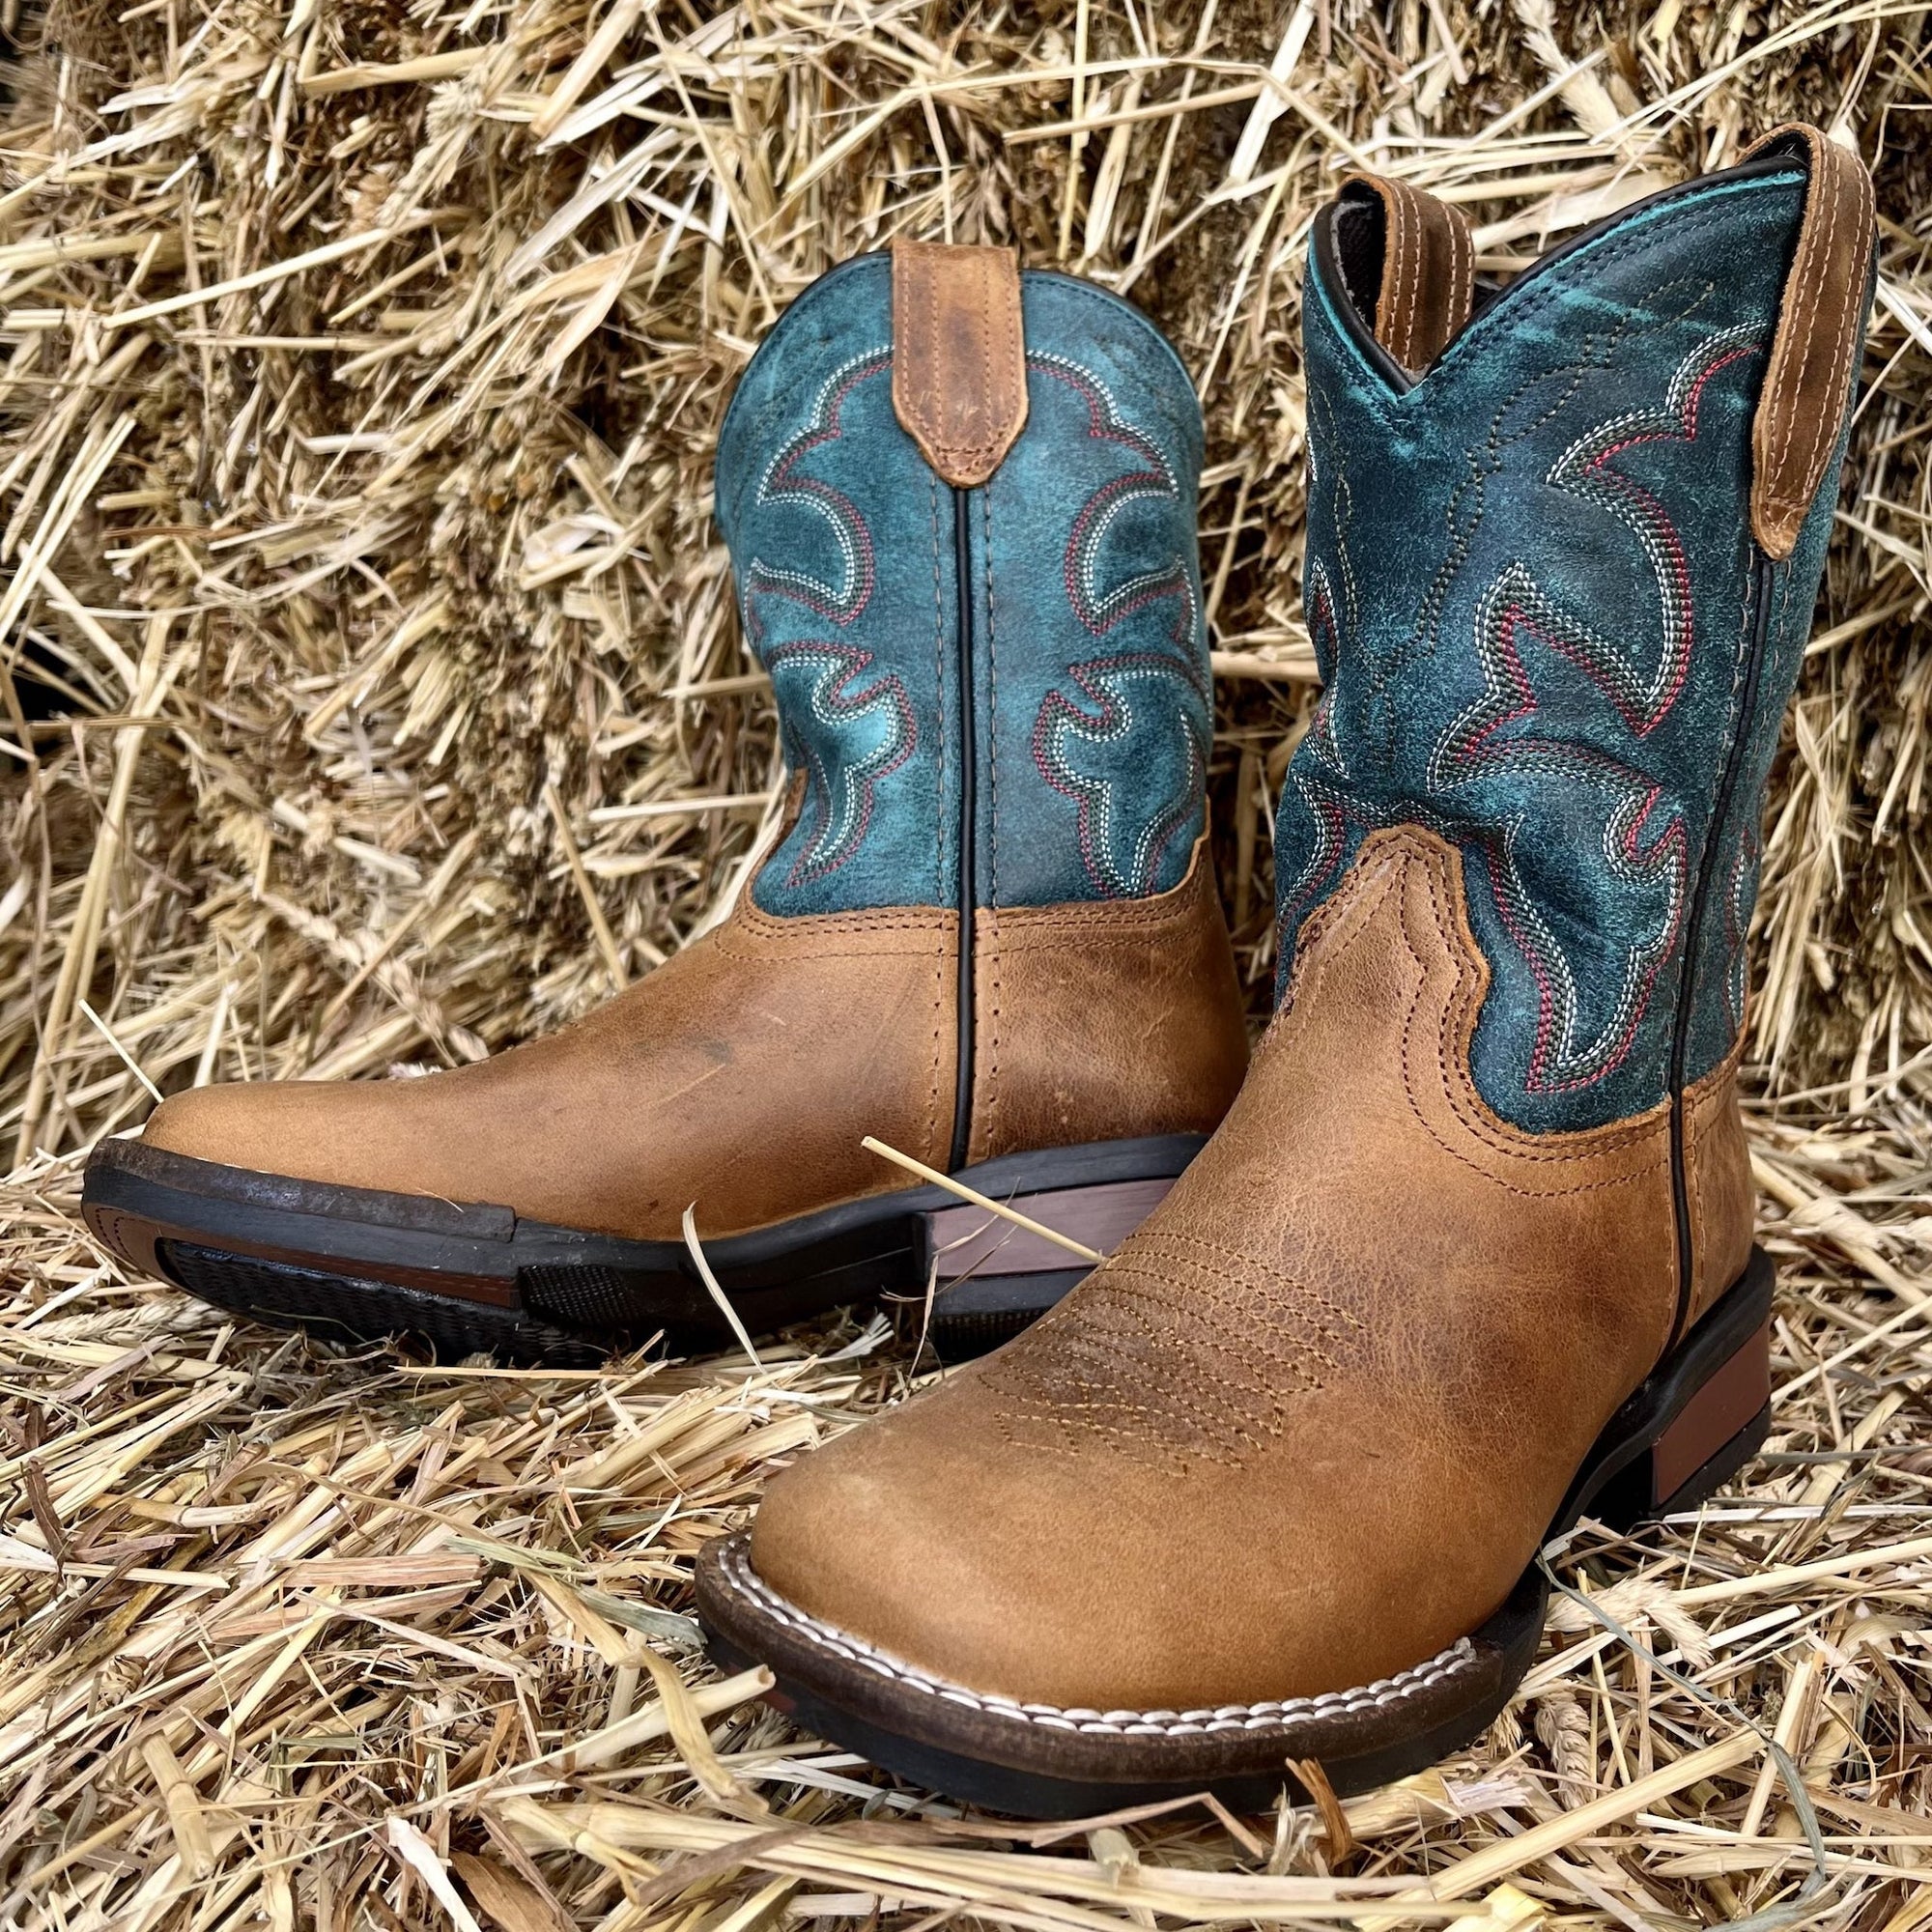 light brown boots with teal blue upper and red and white stitch detailing